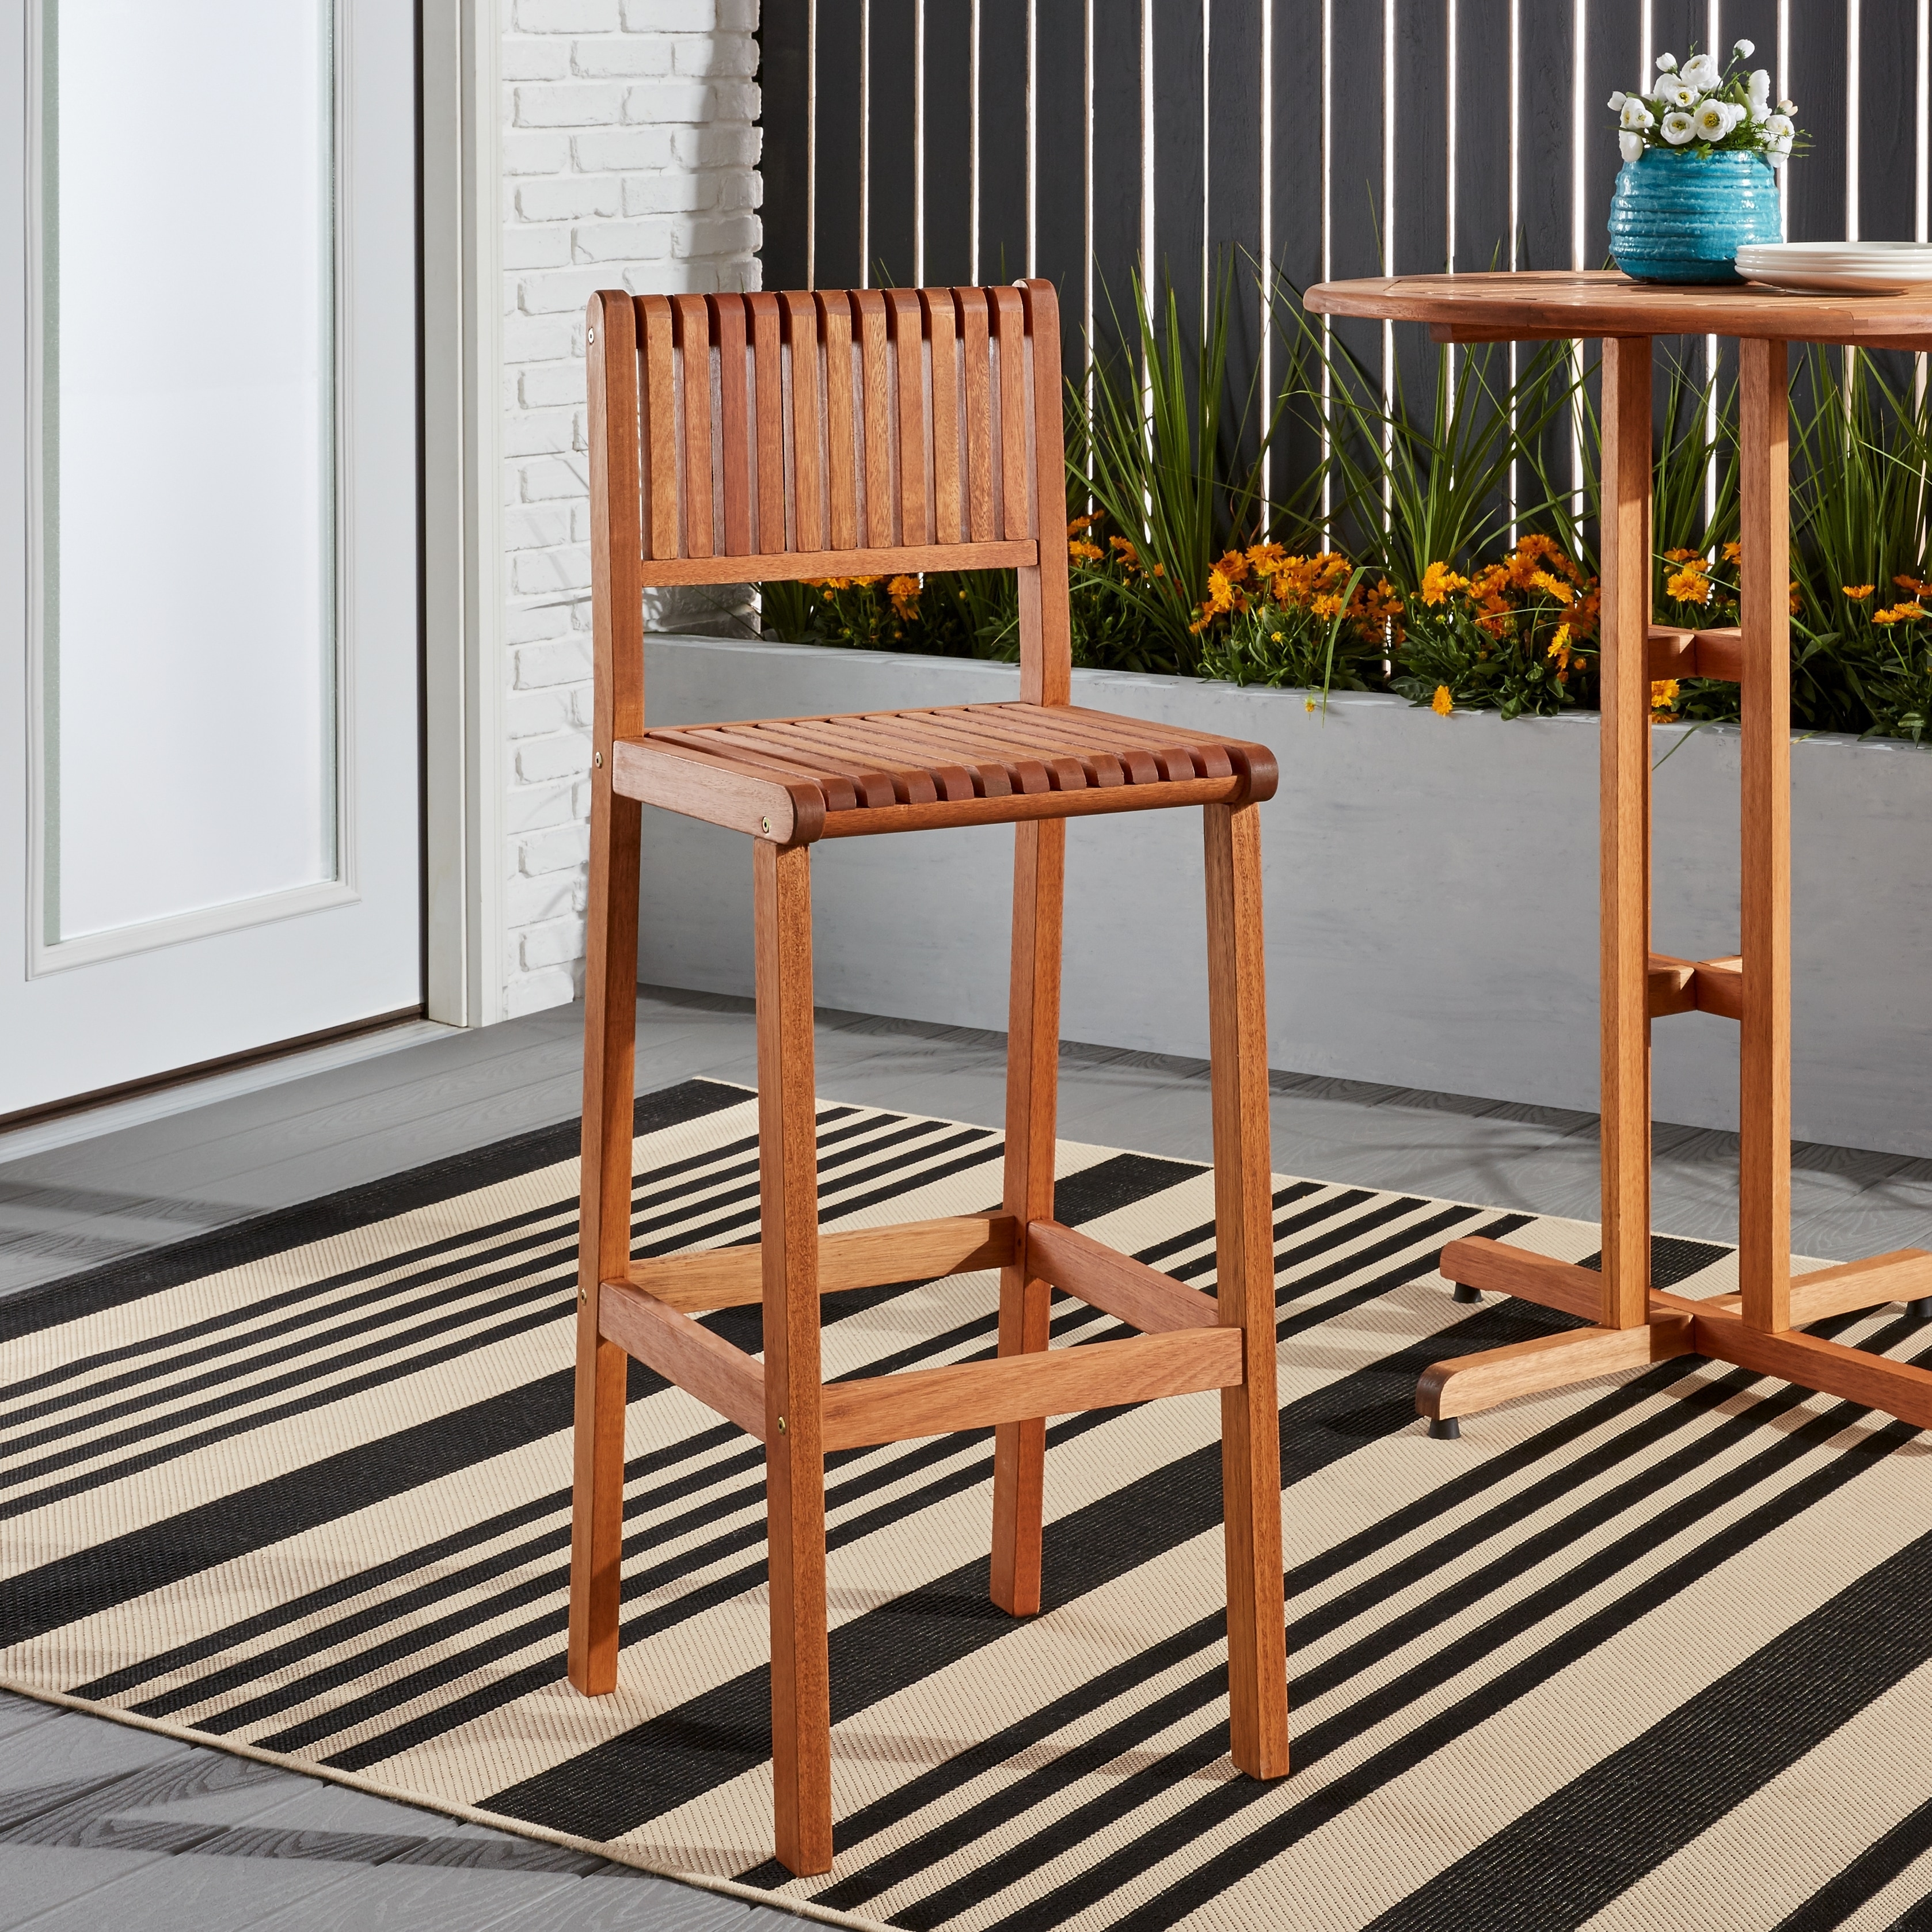 Amazonia Milano 1-Piece Patio Barstool | Eucalyptus Wood | Ideal for Outdoors and Indoors - image 1 of 8